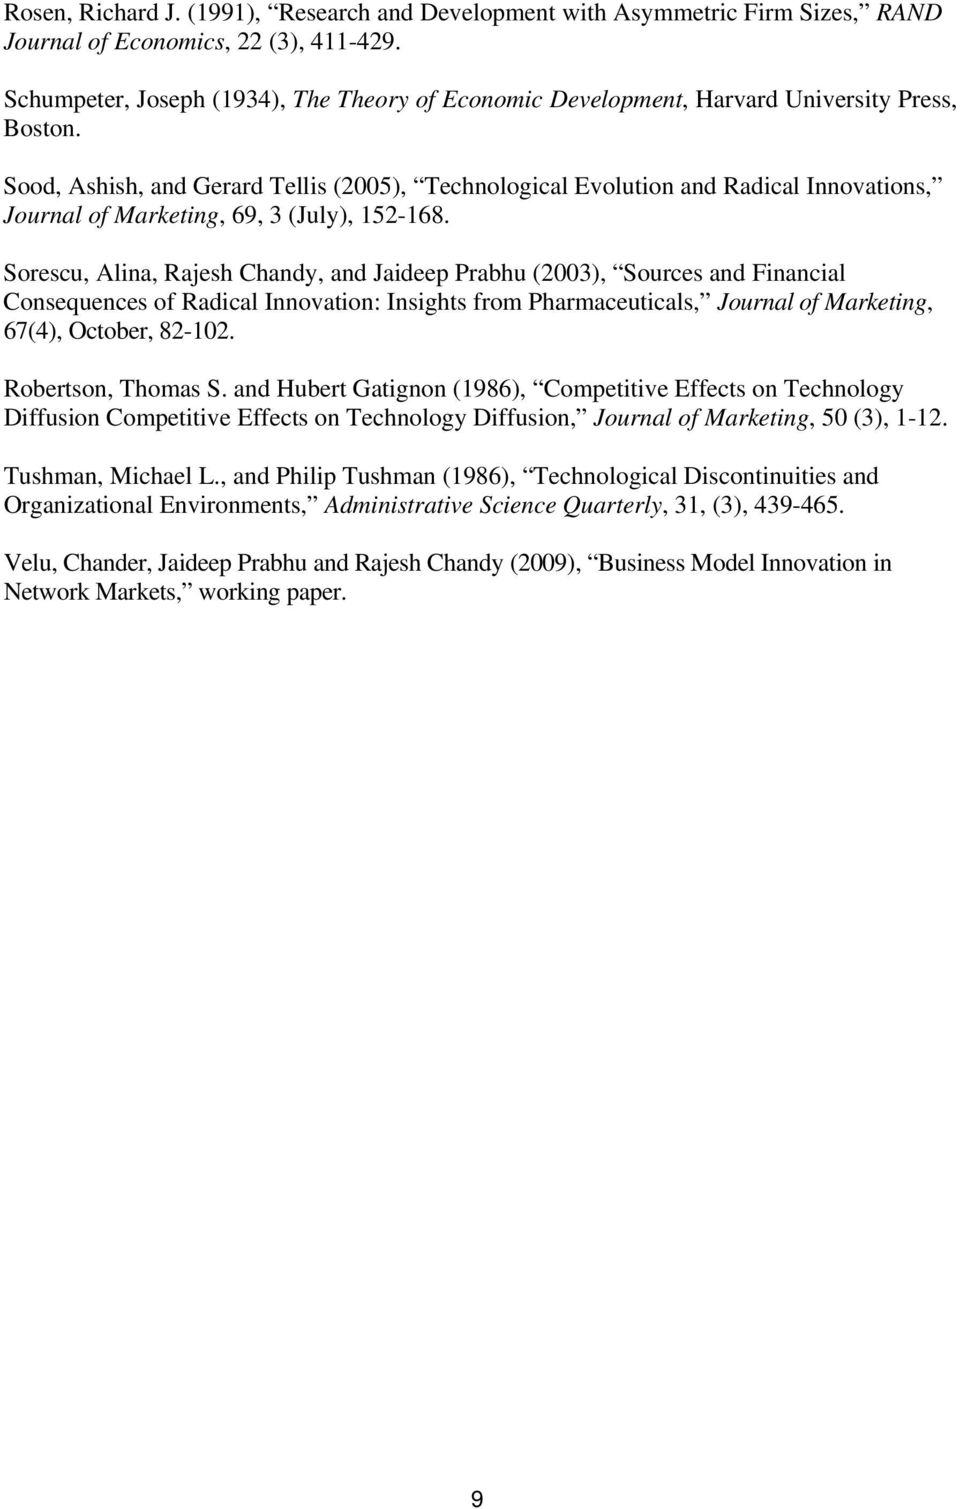 Sood, Ashish, and Gerard Tellis (2005), Technological Evolution and Radical Innovations, Journal of Marketing, 69, 3 (July), 152-168.